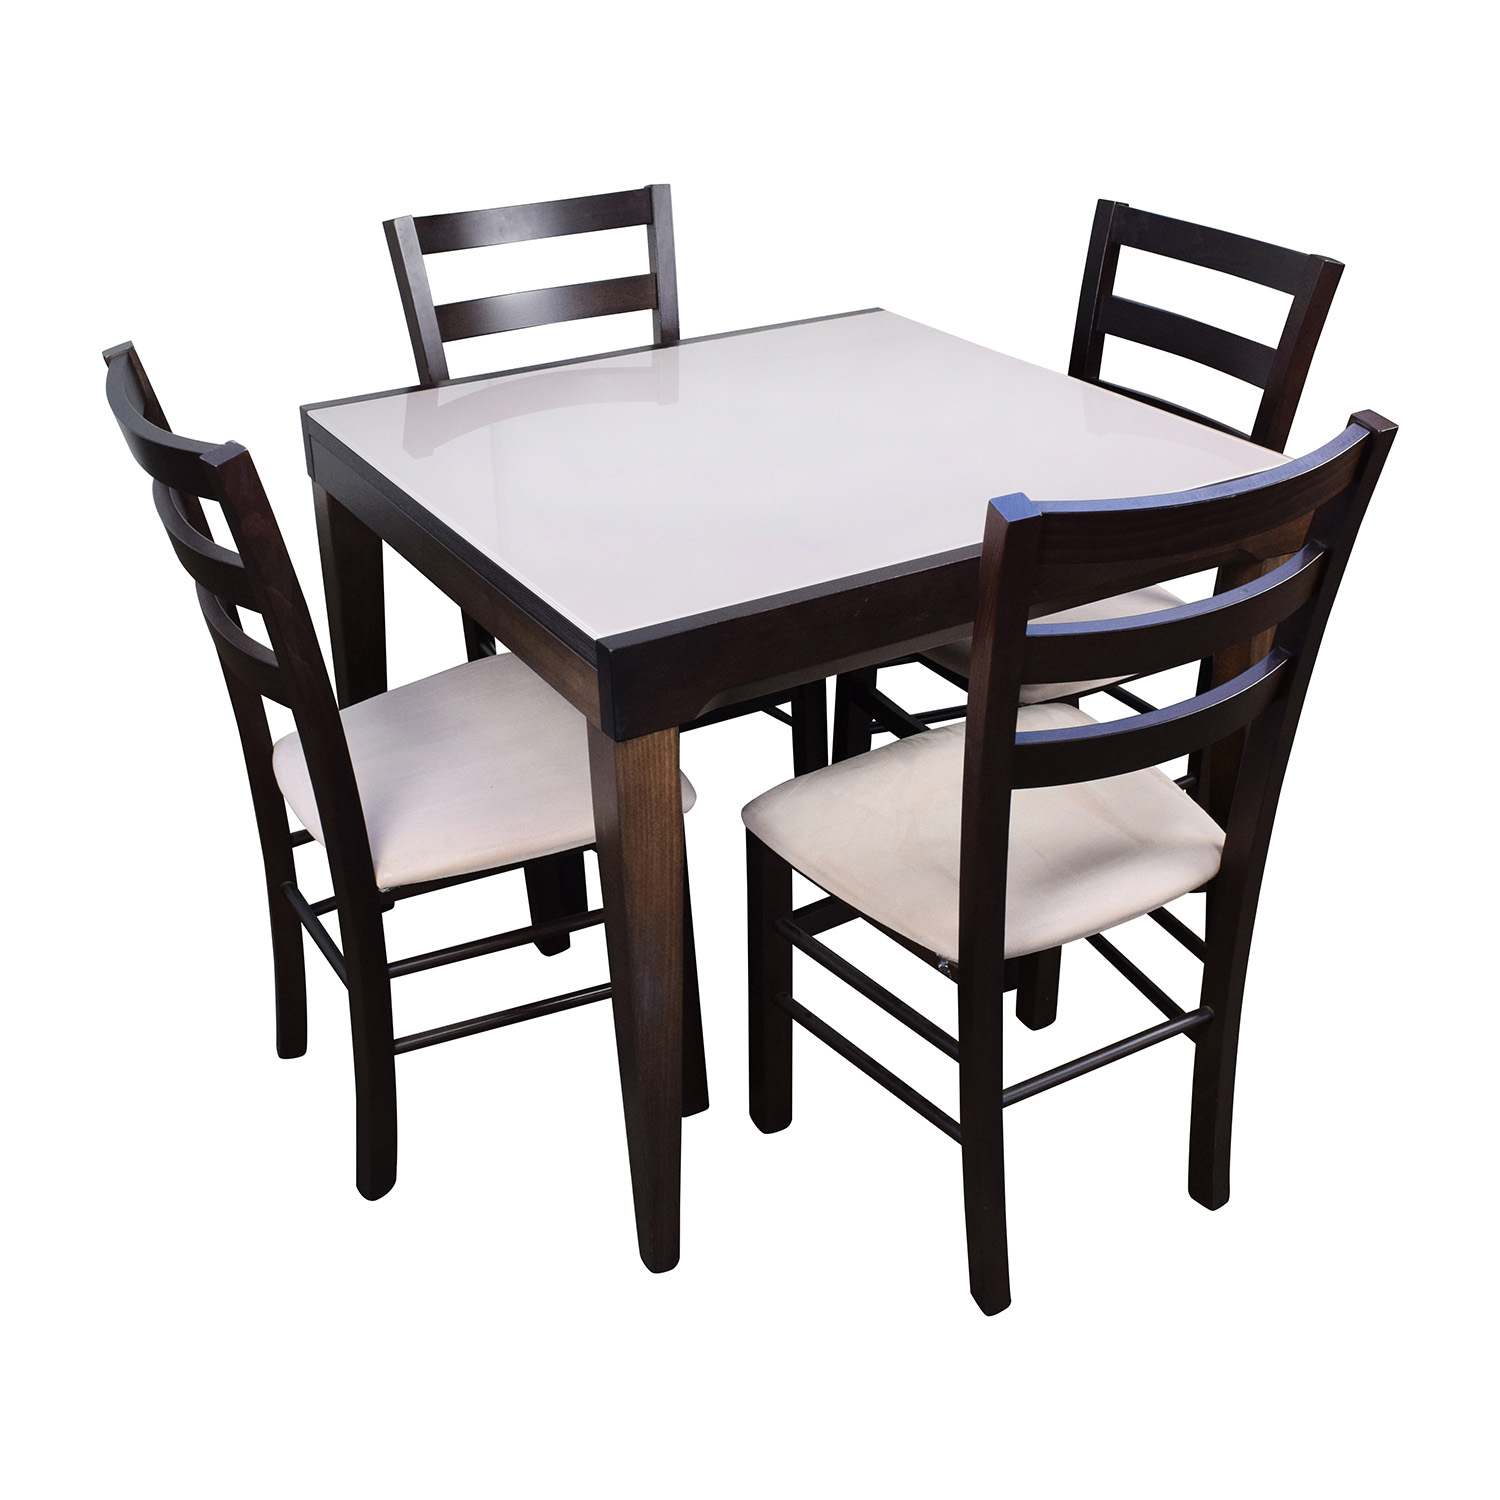 82 Off Macys Macys Cafe Latte Five Piece Extendable Dining Set Tables intended for size 1500 X 1500